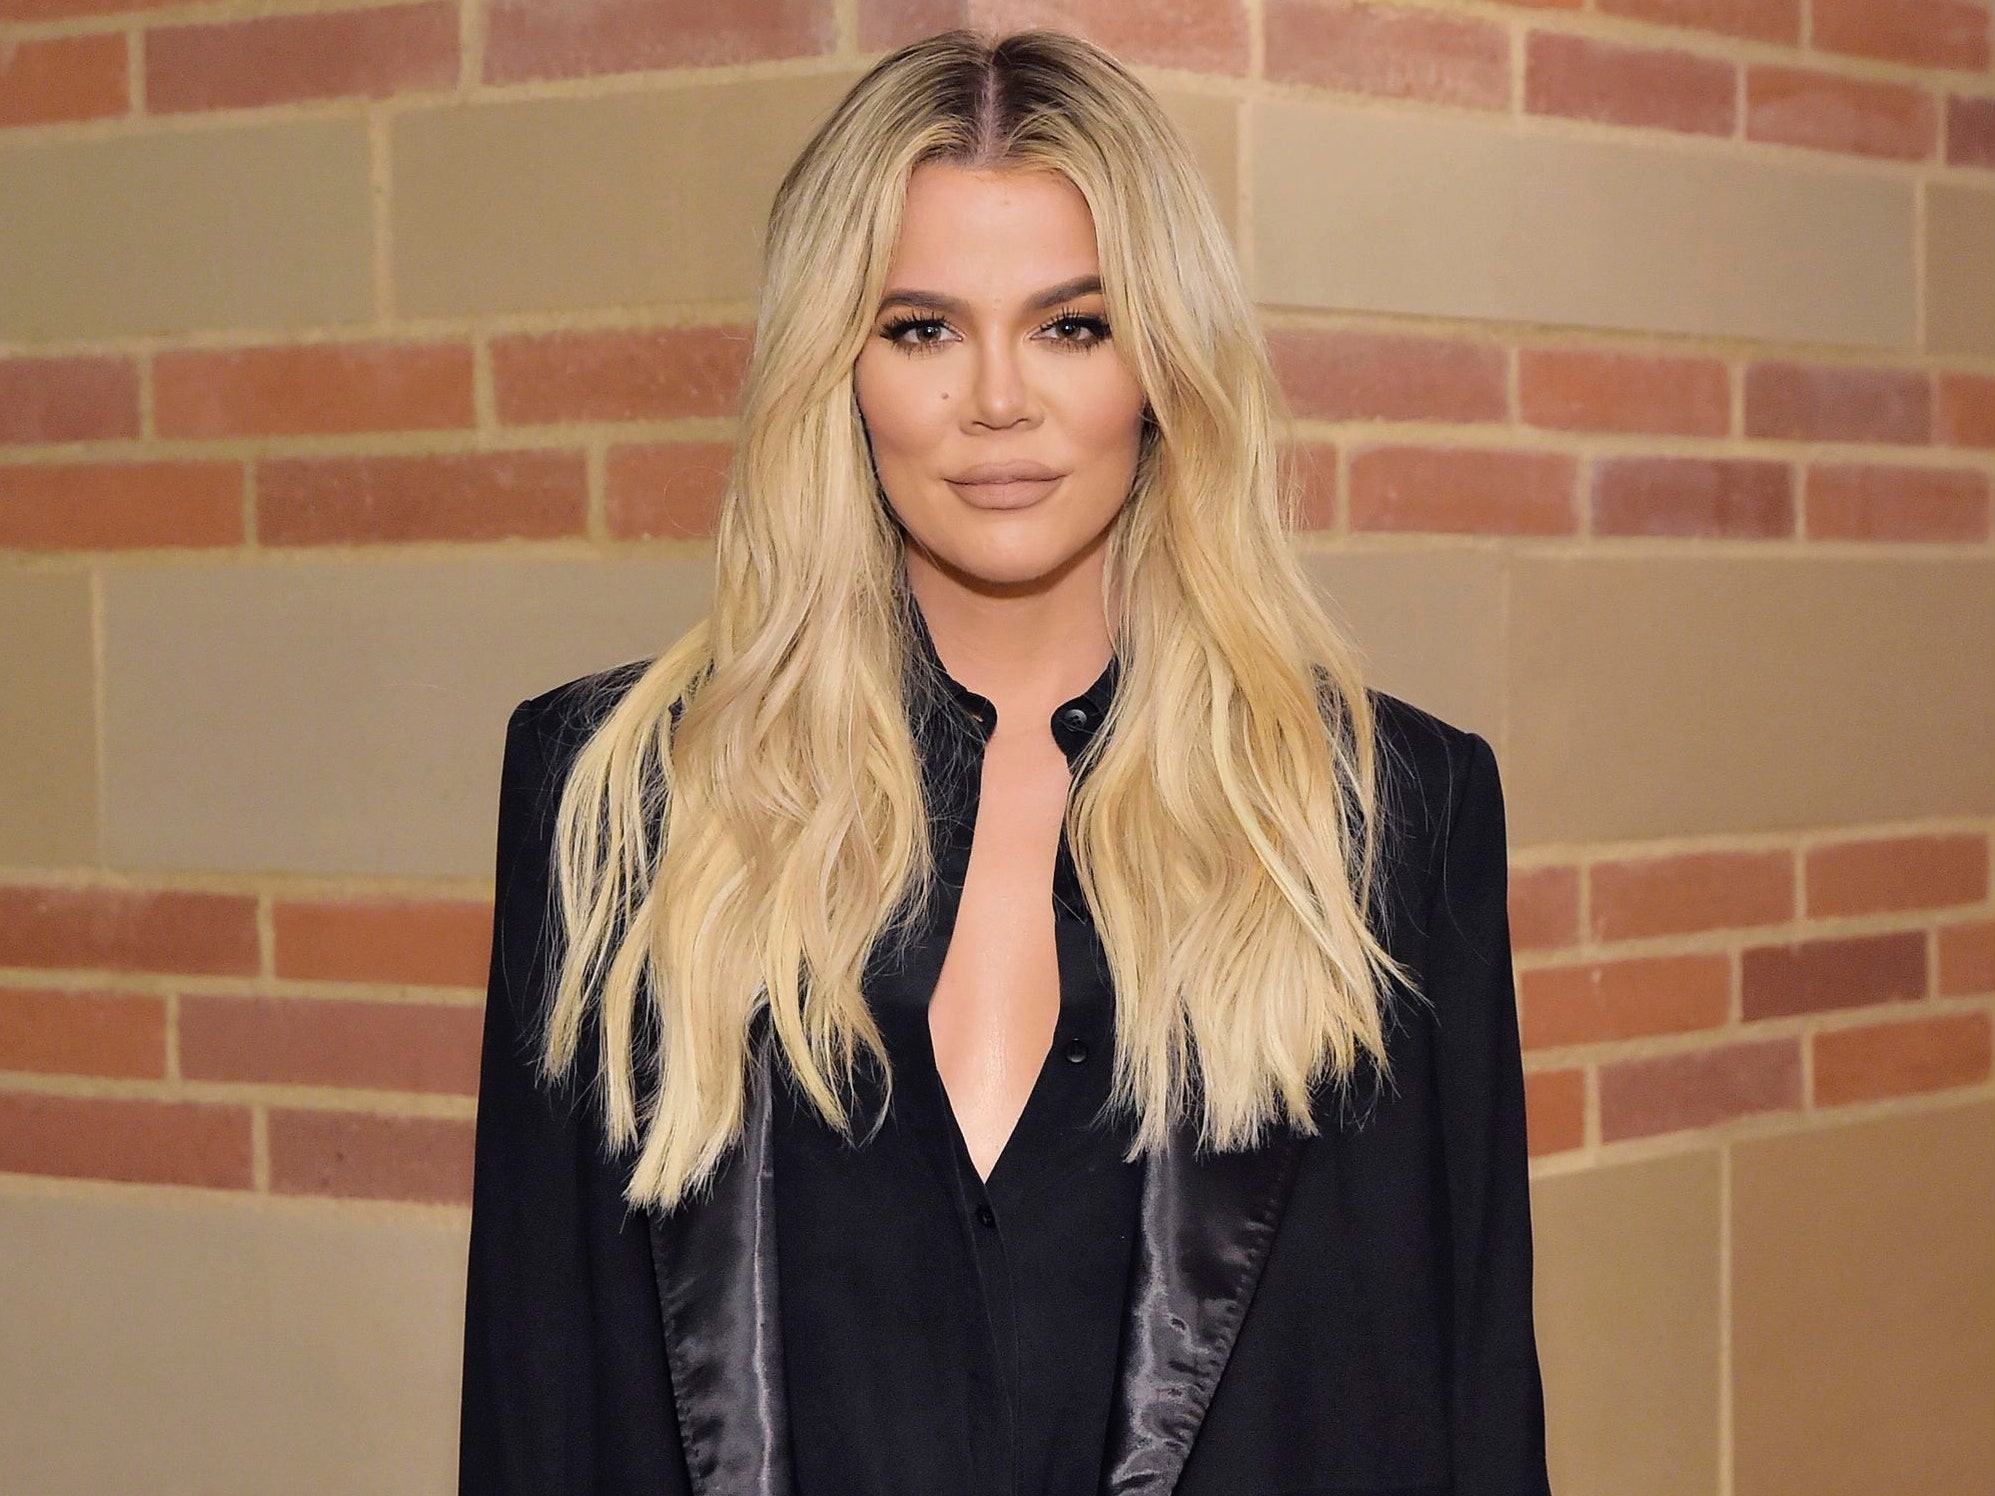 Khloe Kardashian Wants Peace Of Thought by Being Away From Social Media Going Offline!